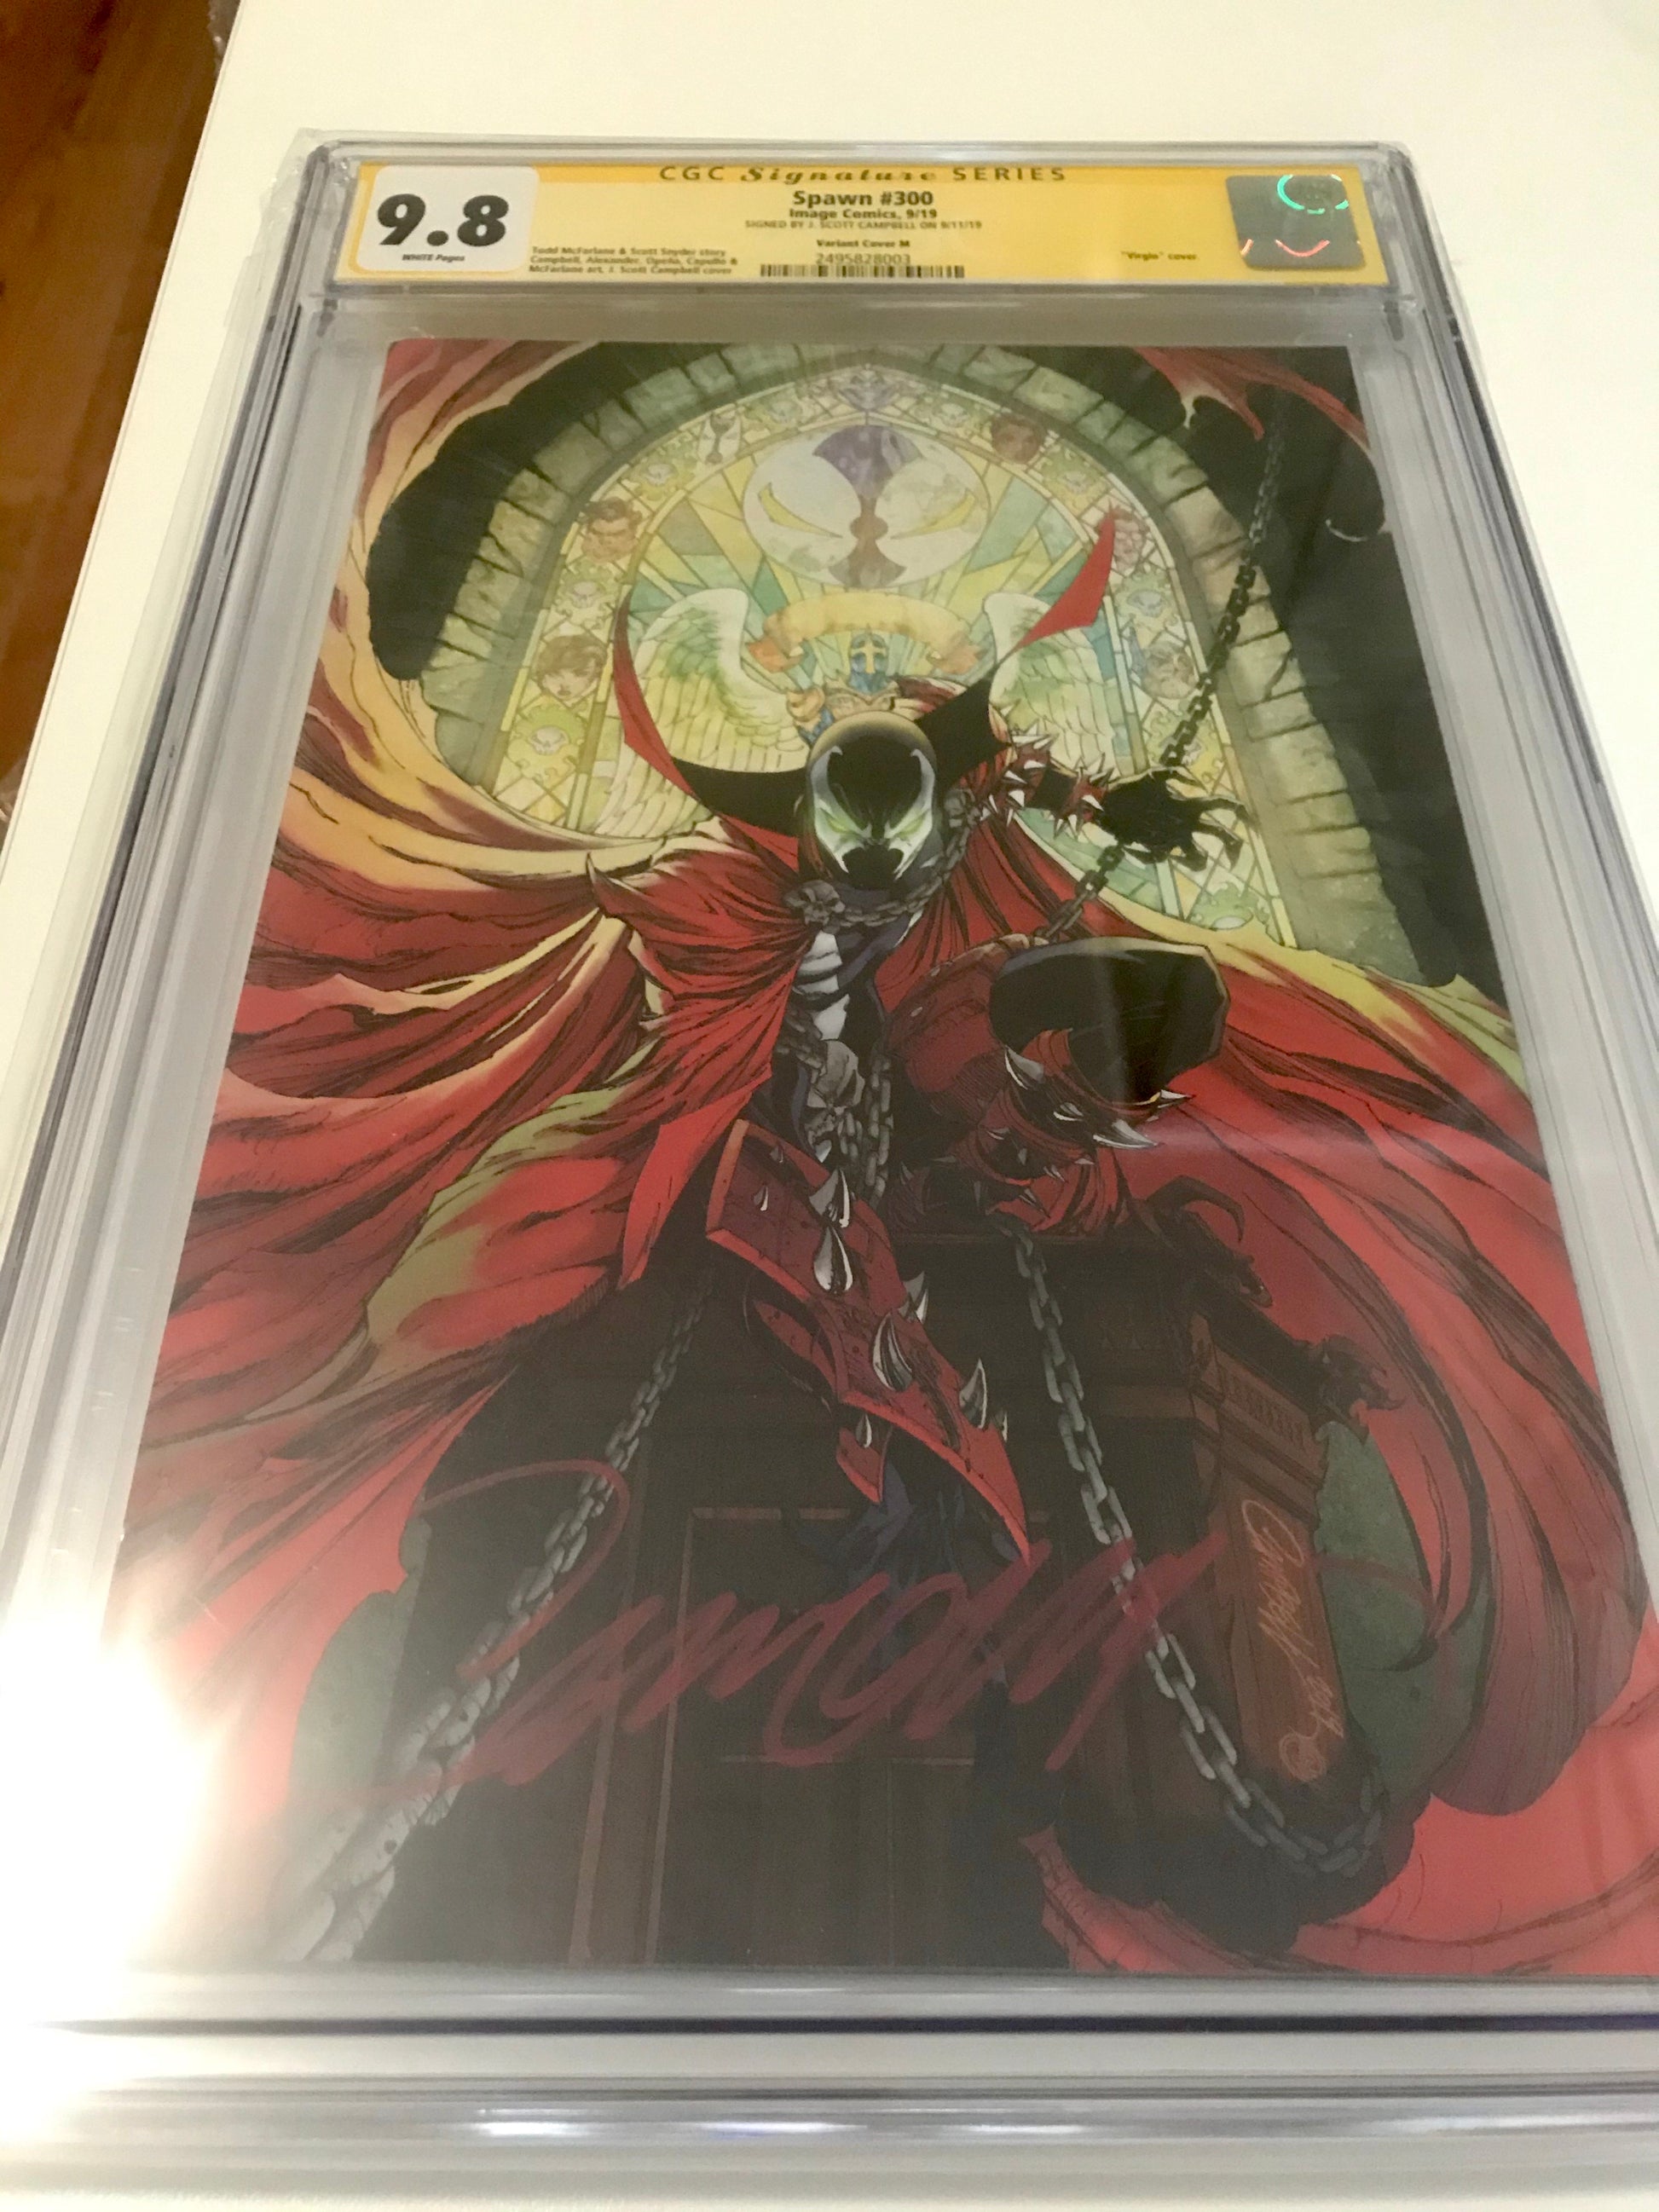 Spawn 300 - CGC Signed by Scott Campbell - Heroes Cave